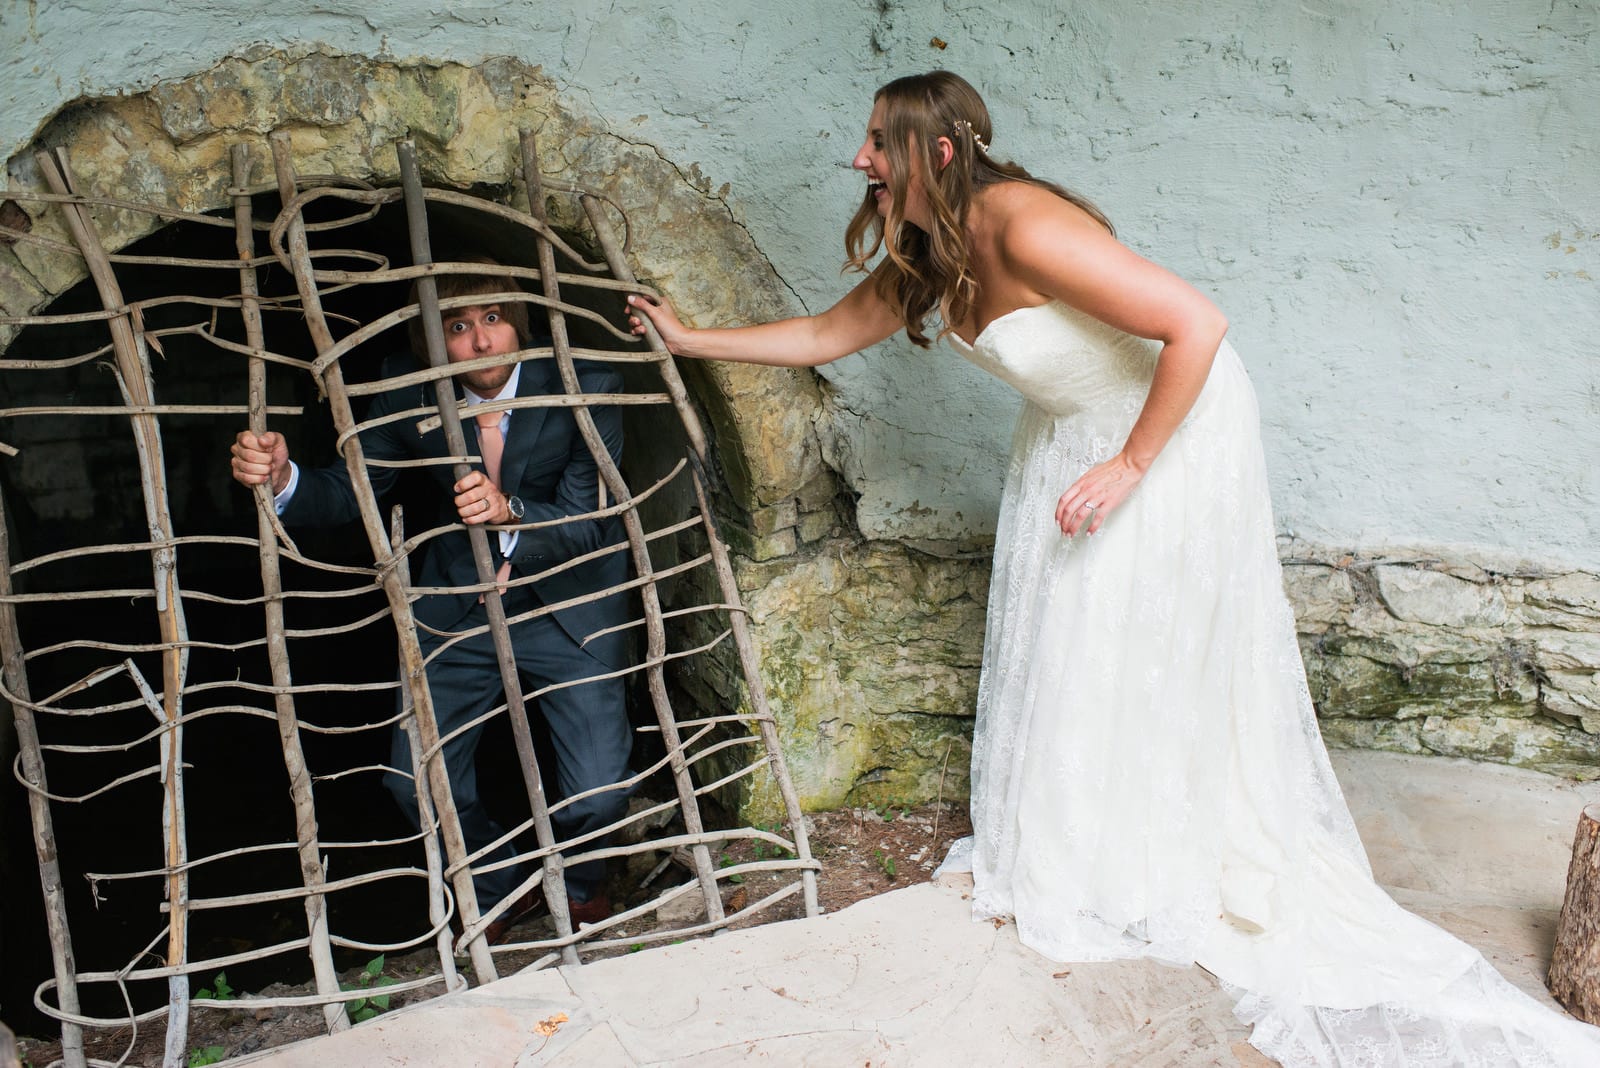 A bride and groom goof around as the groom pretends that he's trapped inside of a wooden grate during their Hyeholde Wedding Pittsburgh.